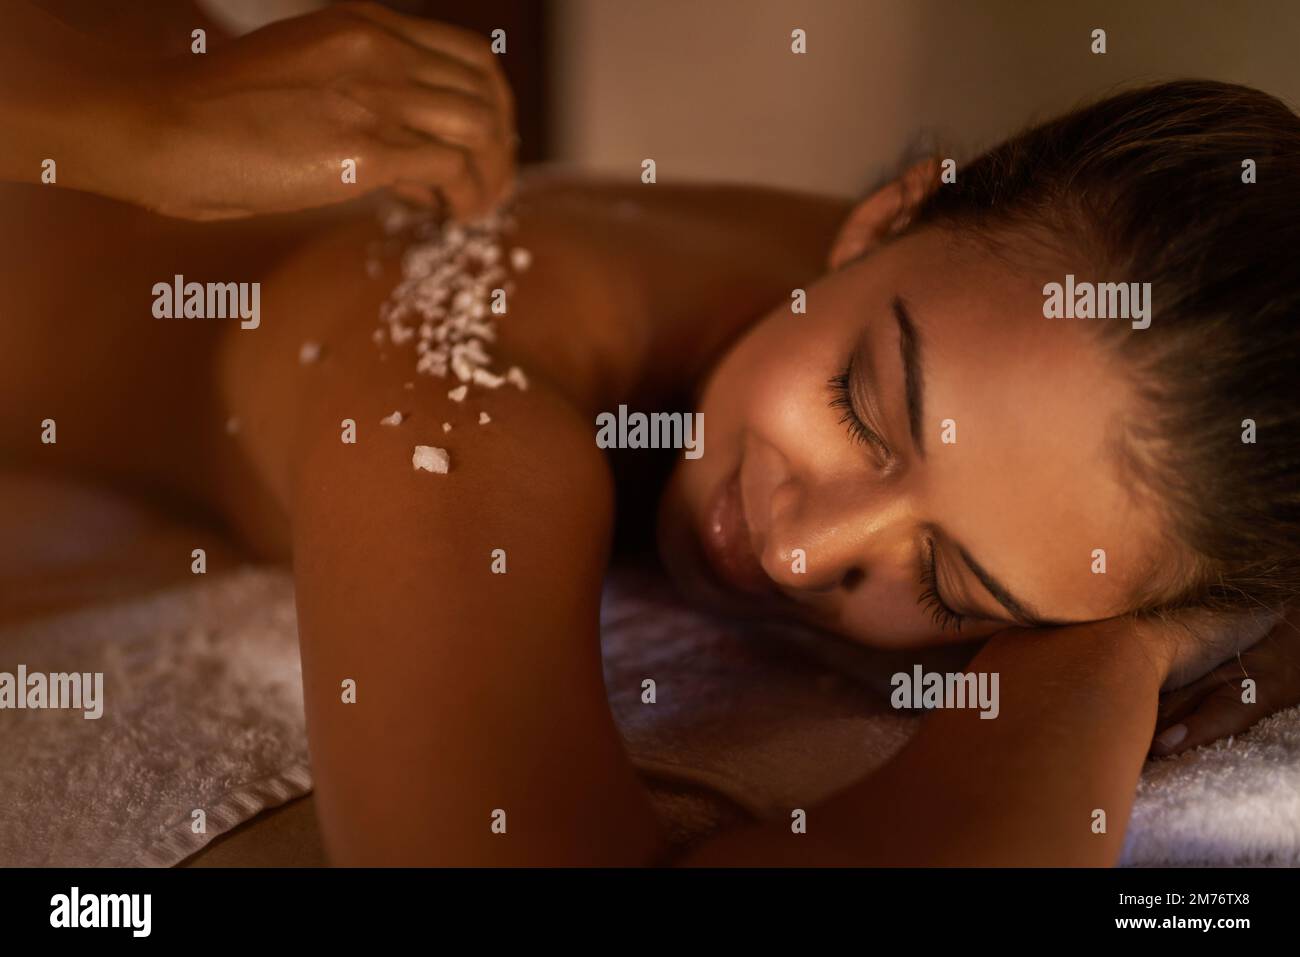 Keep calm and have a spa day. a young woman enjoying a salt exfoliation treatment at a spa. Stock Photo